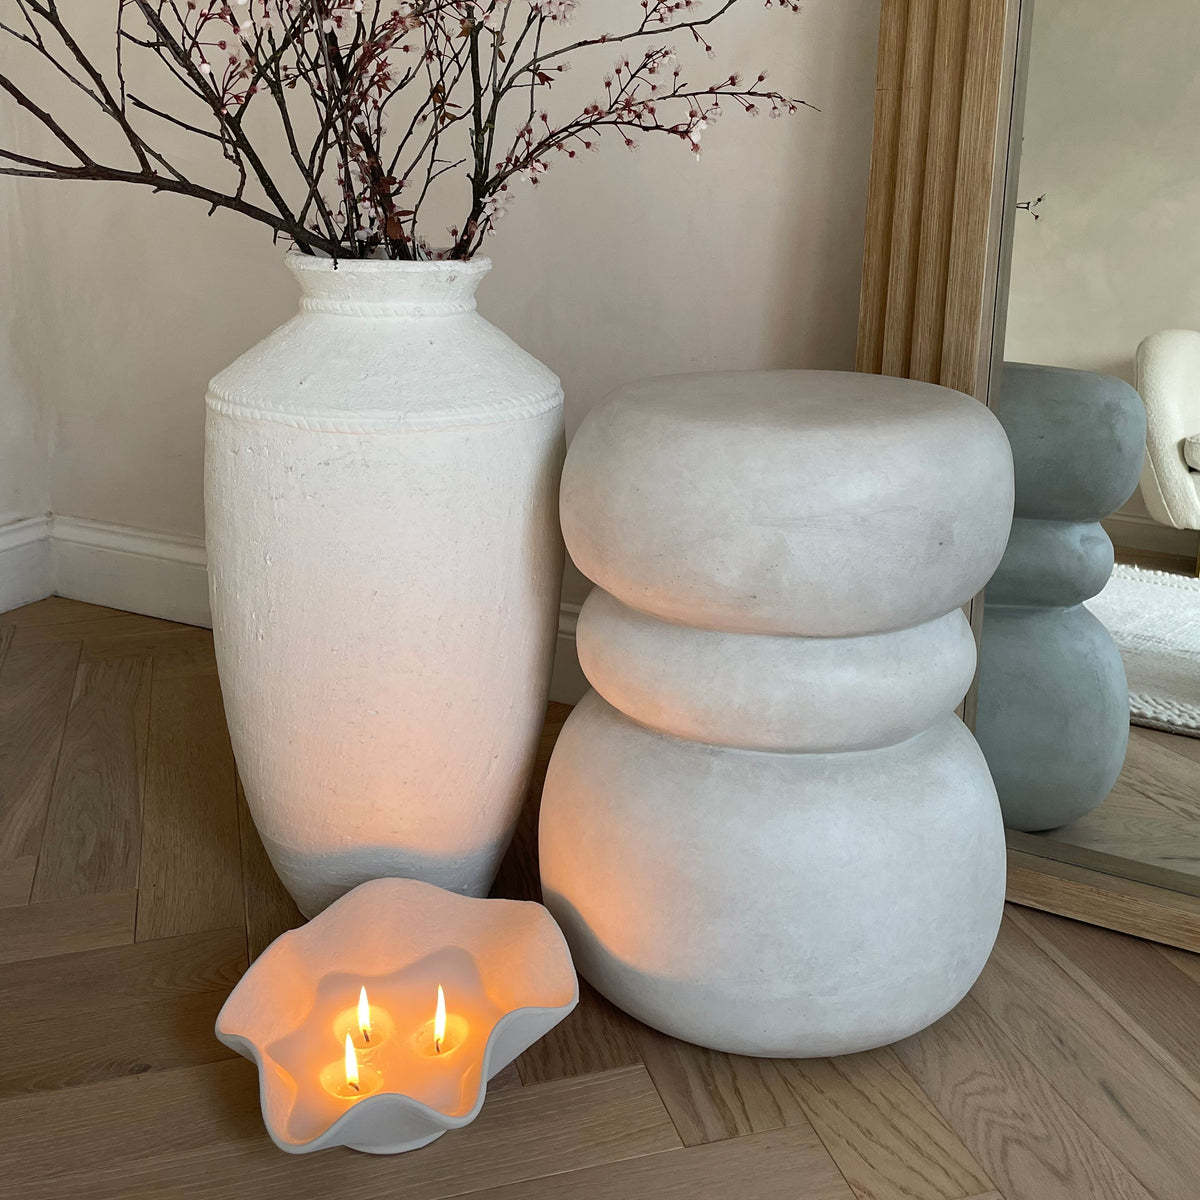 Minimal Concrete Side Table beside vase and candles